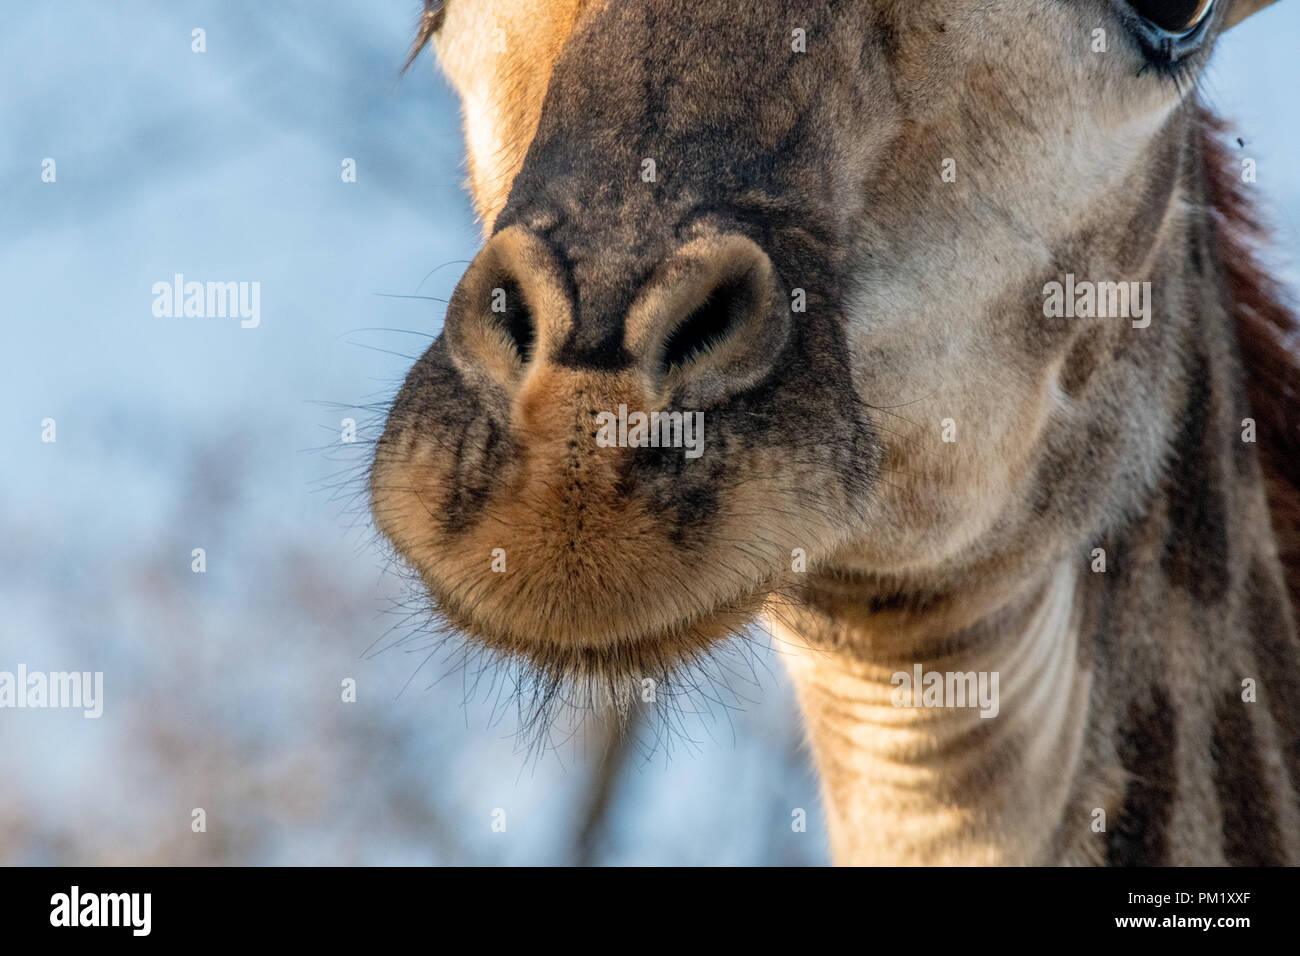 A close up photo of a giraffe mouth with a portruding neck and many bristles and its distinctive coat. Taken in the wild with good light showing coat Stock Photo